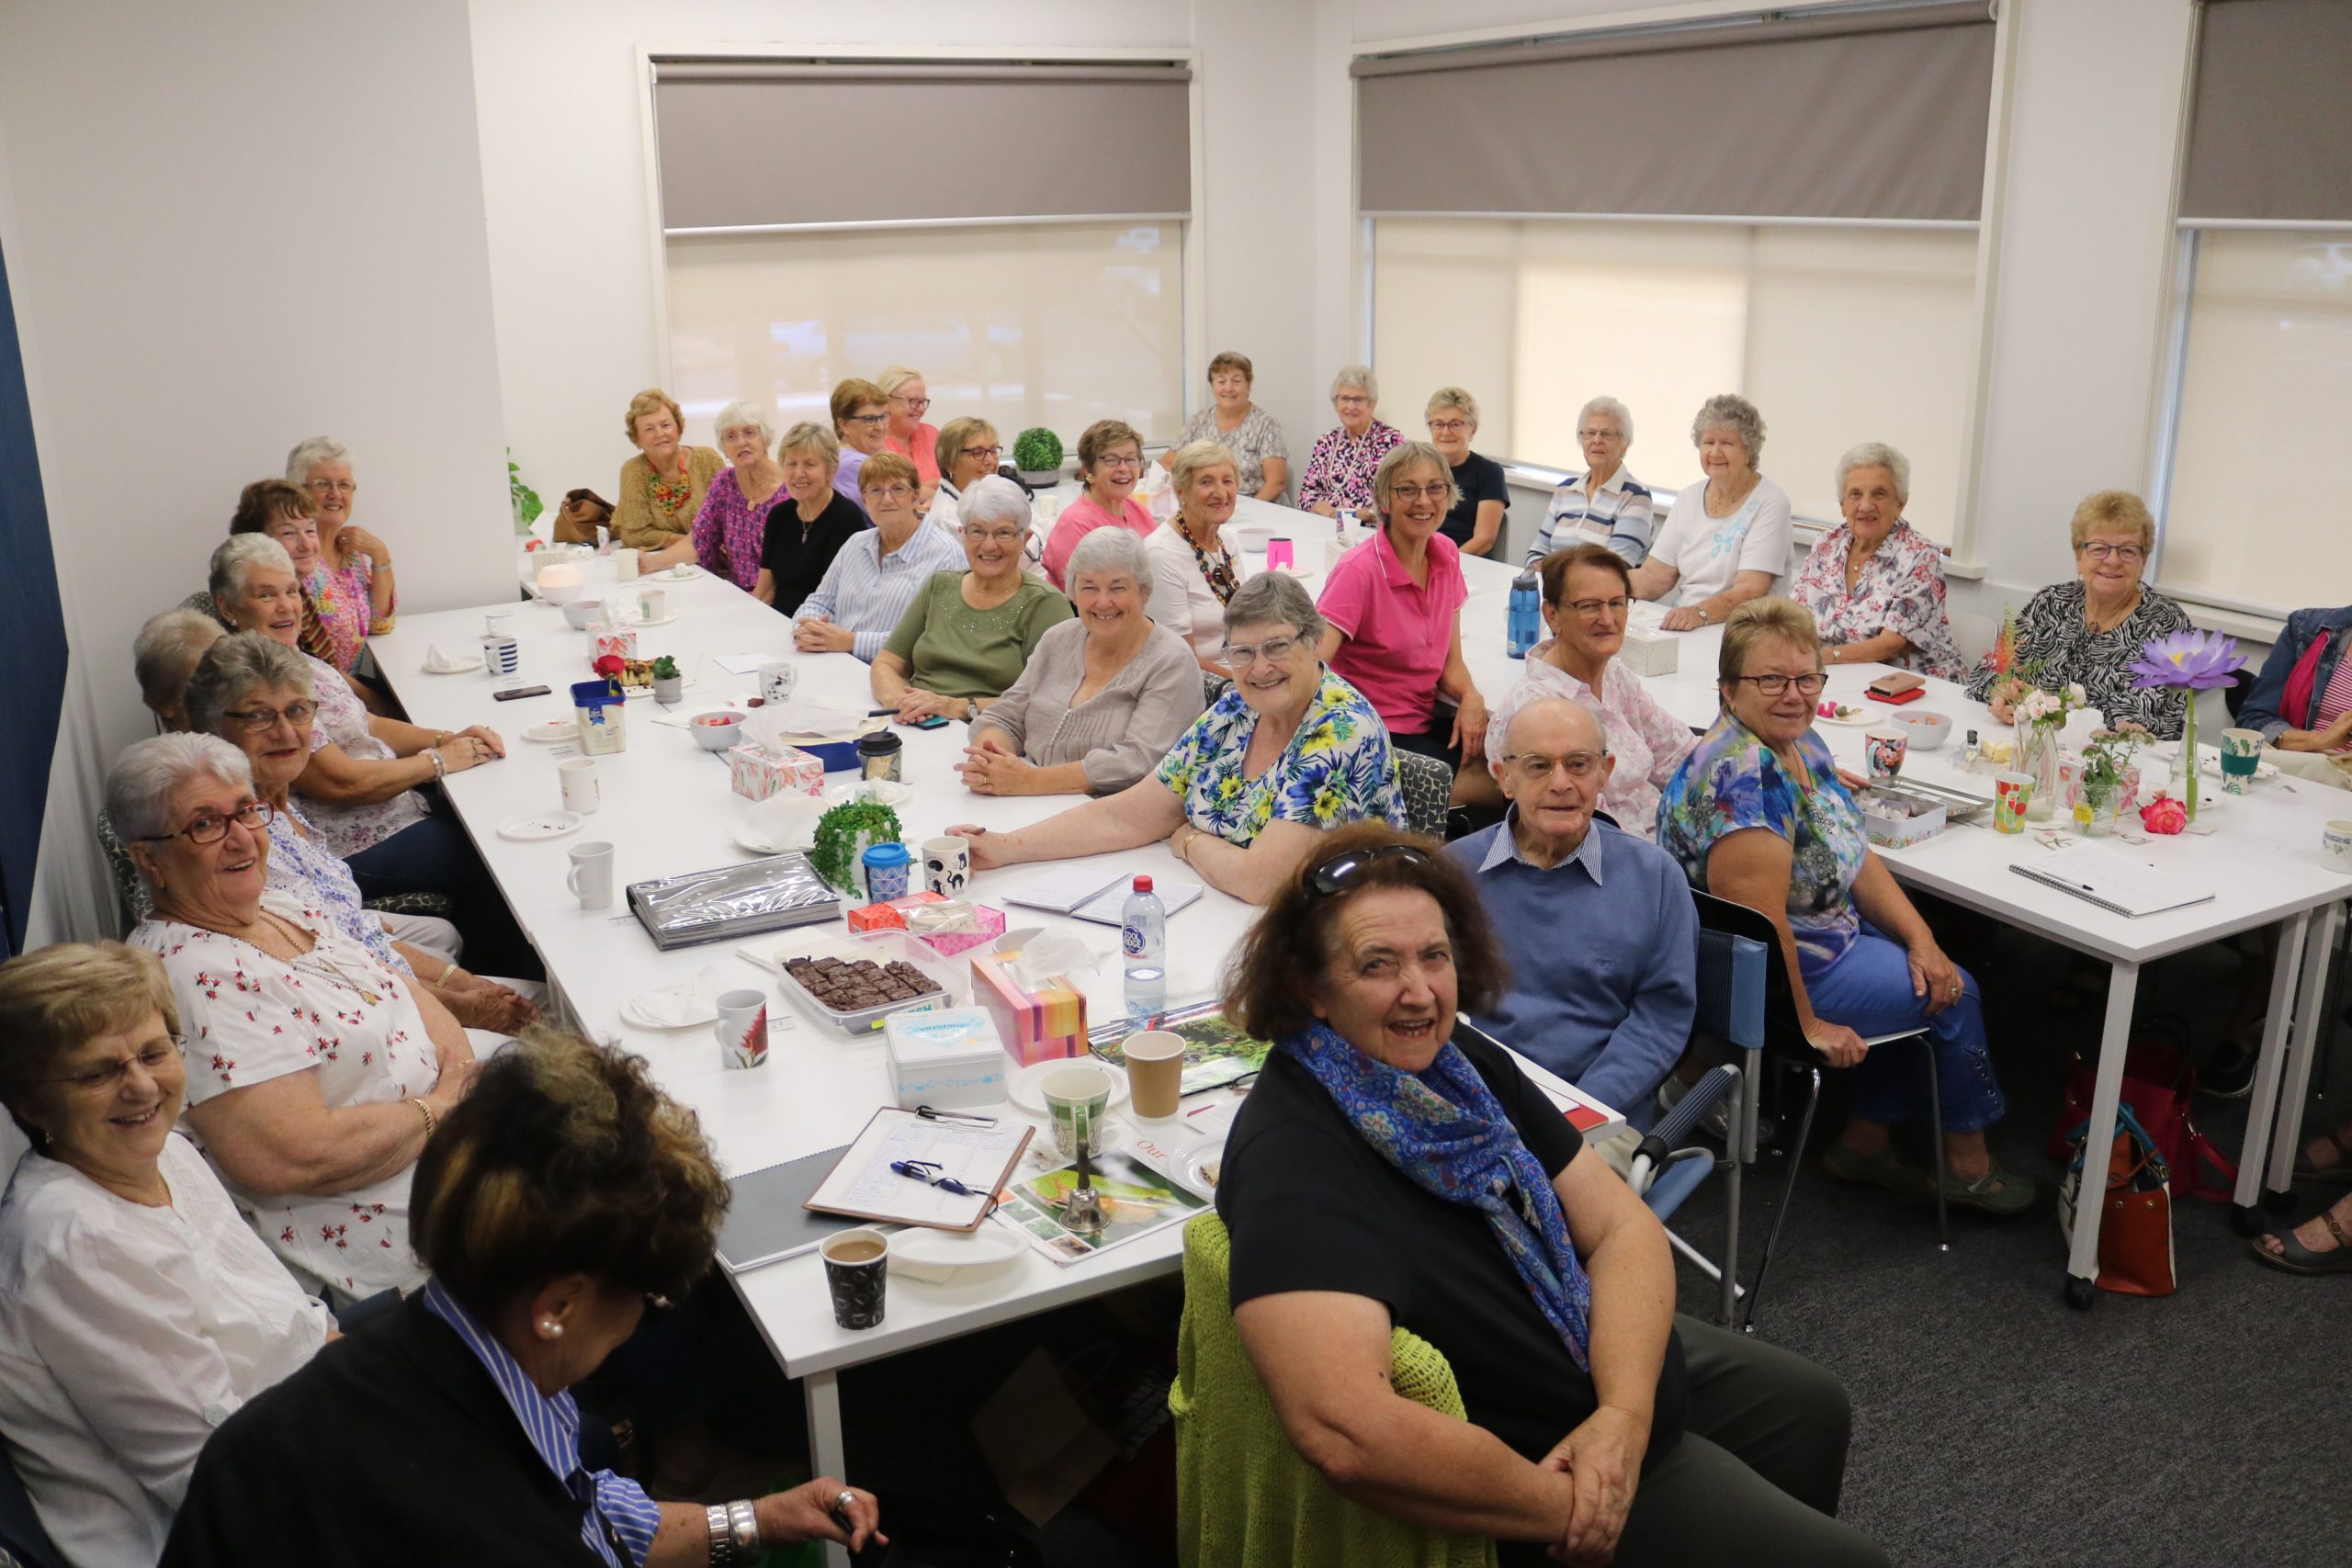 Garden Club hosts monthly meeting at the Country University Centre